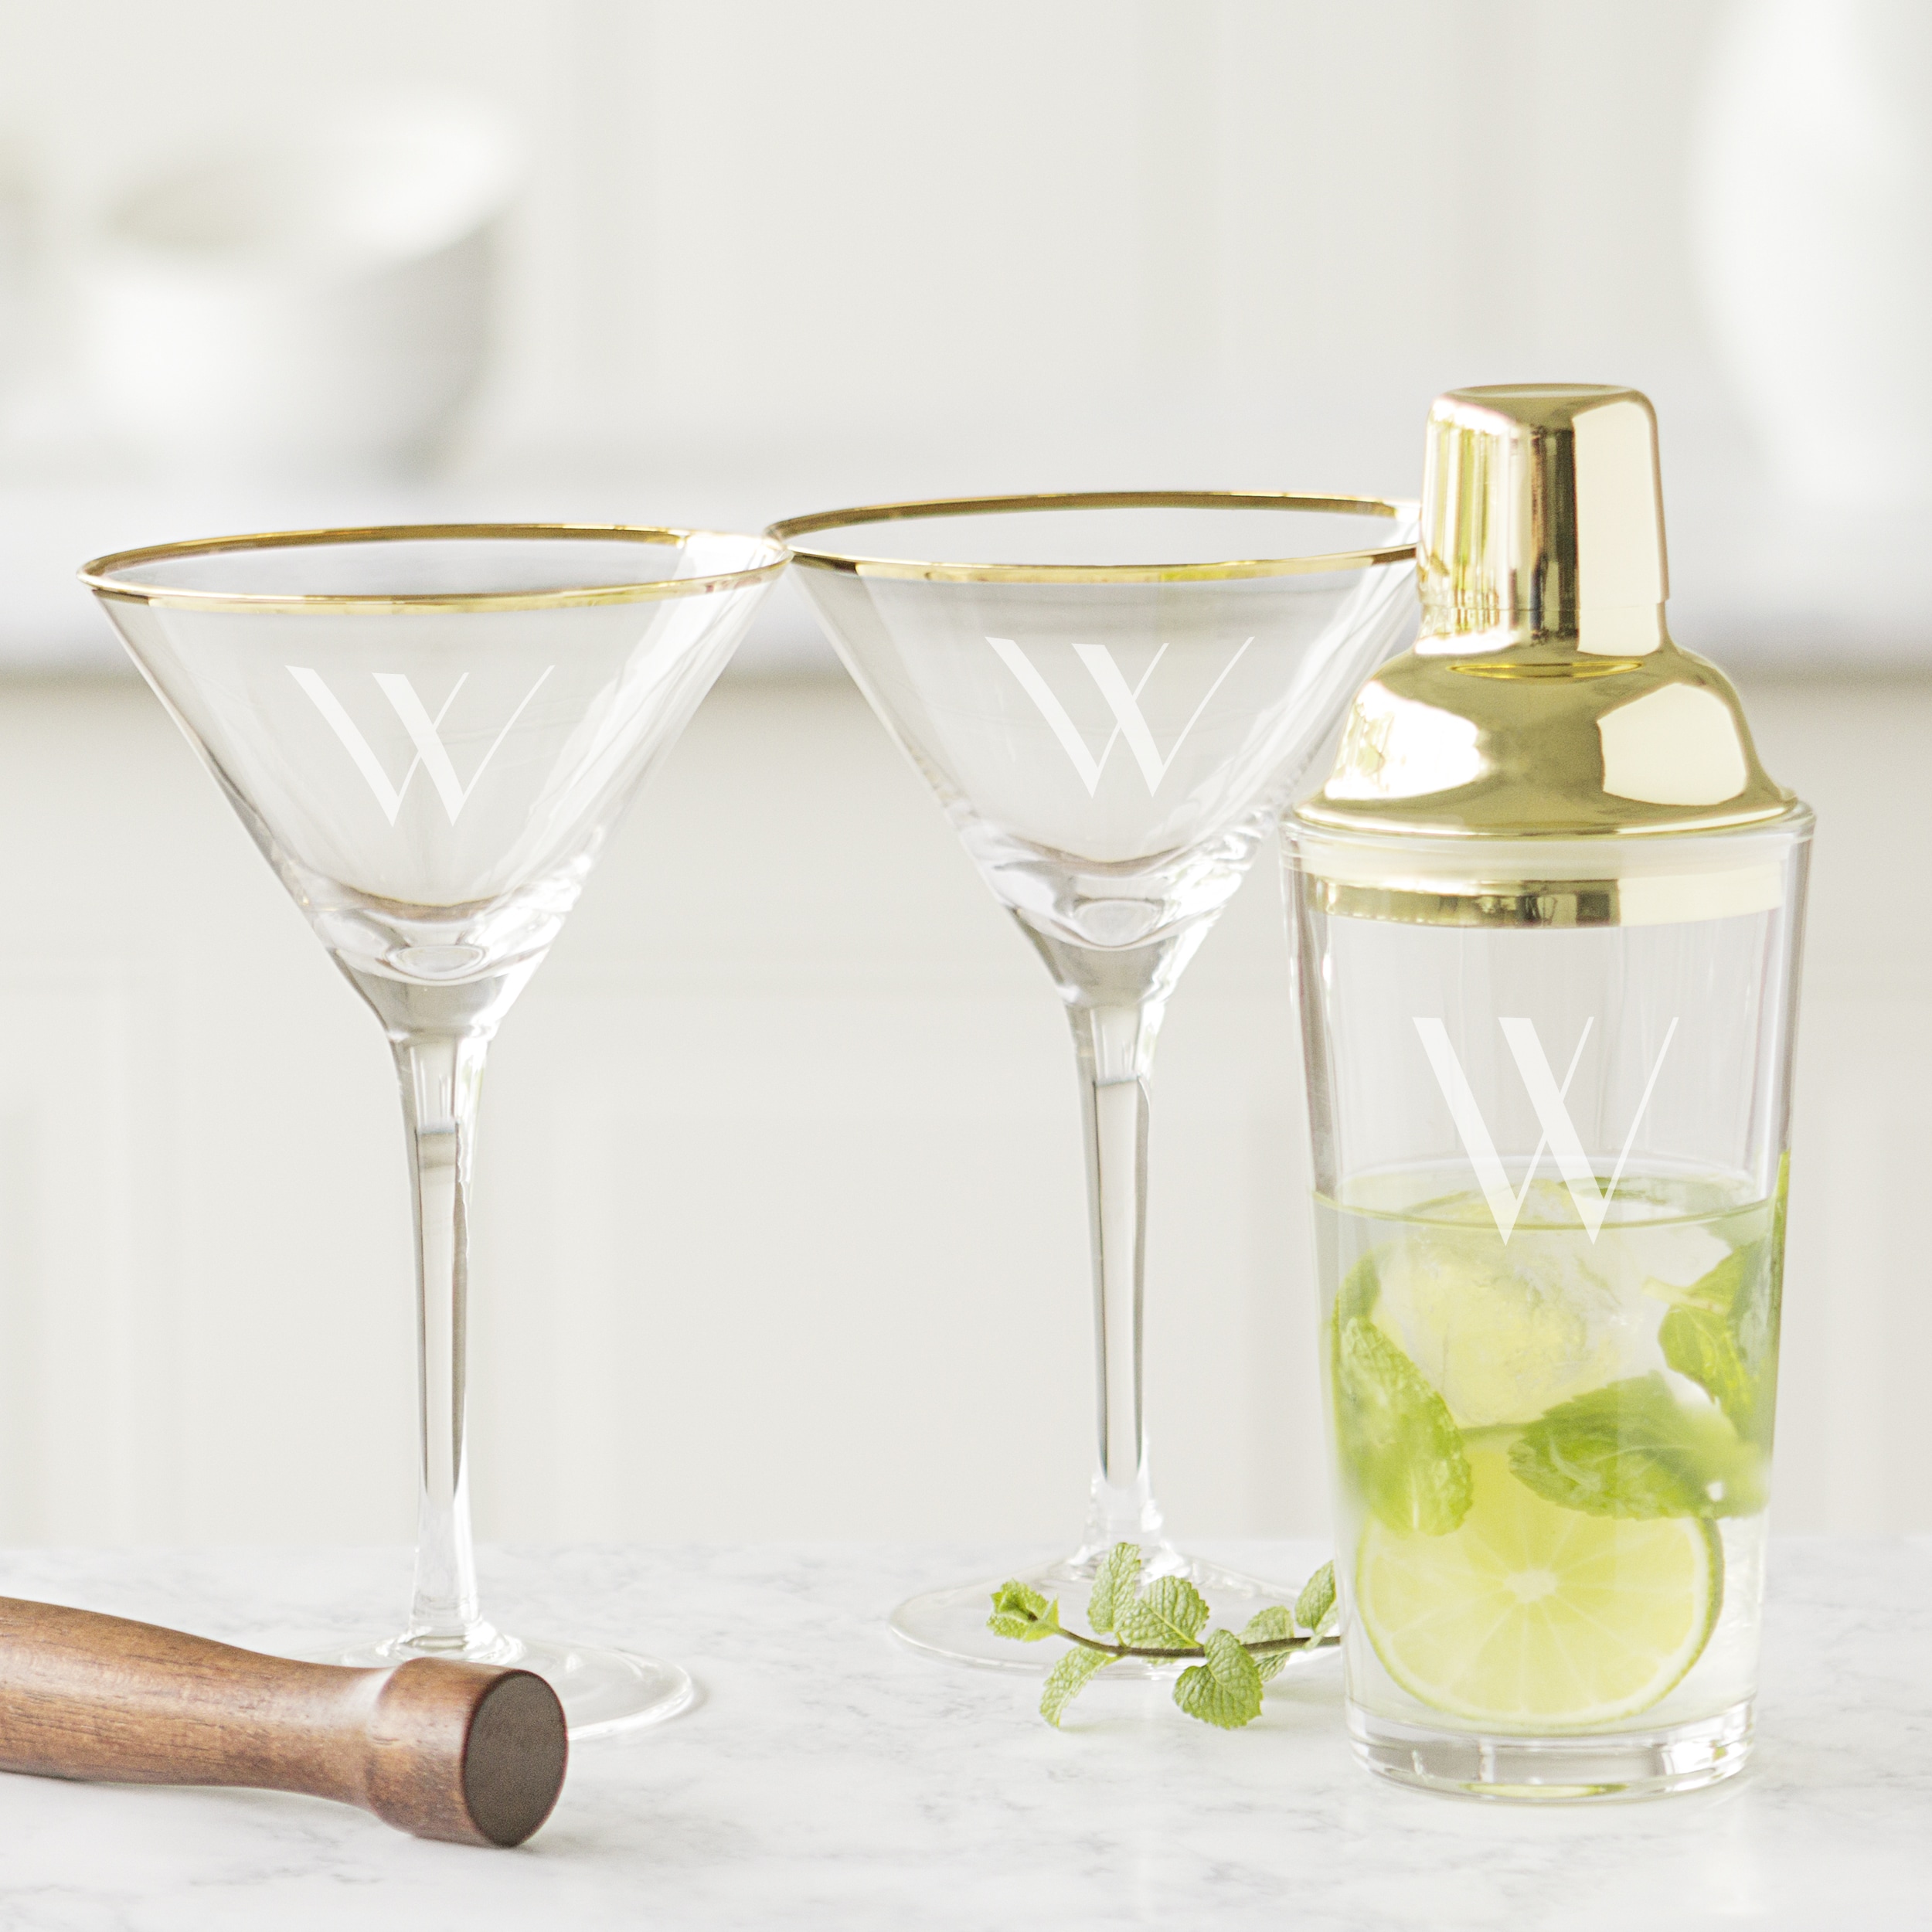 Great looking Amber Glass Cocktail Shaker Martini set.